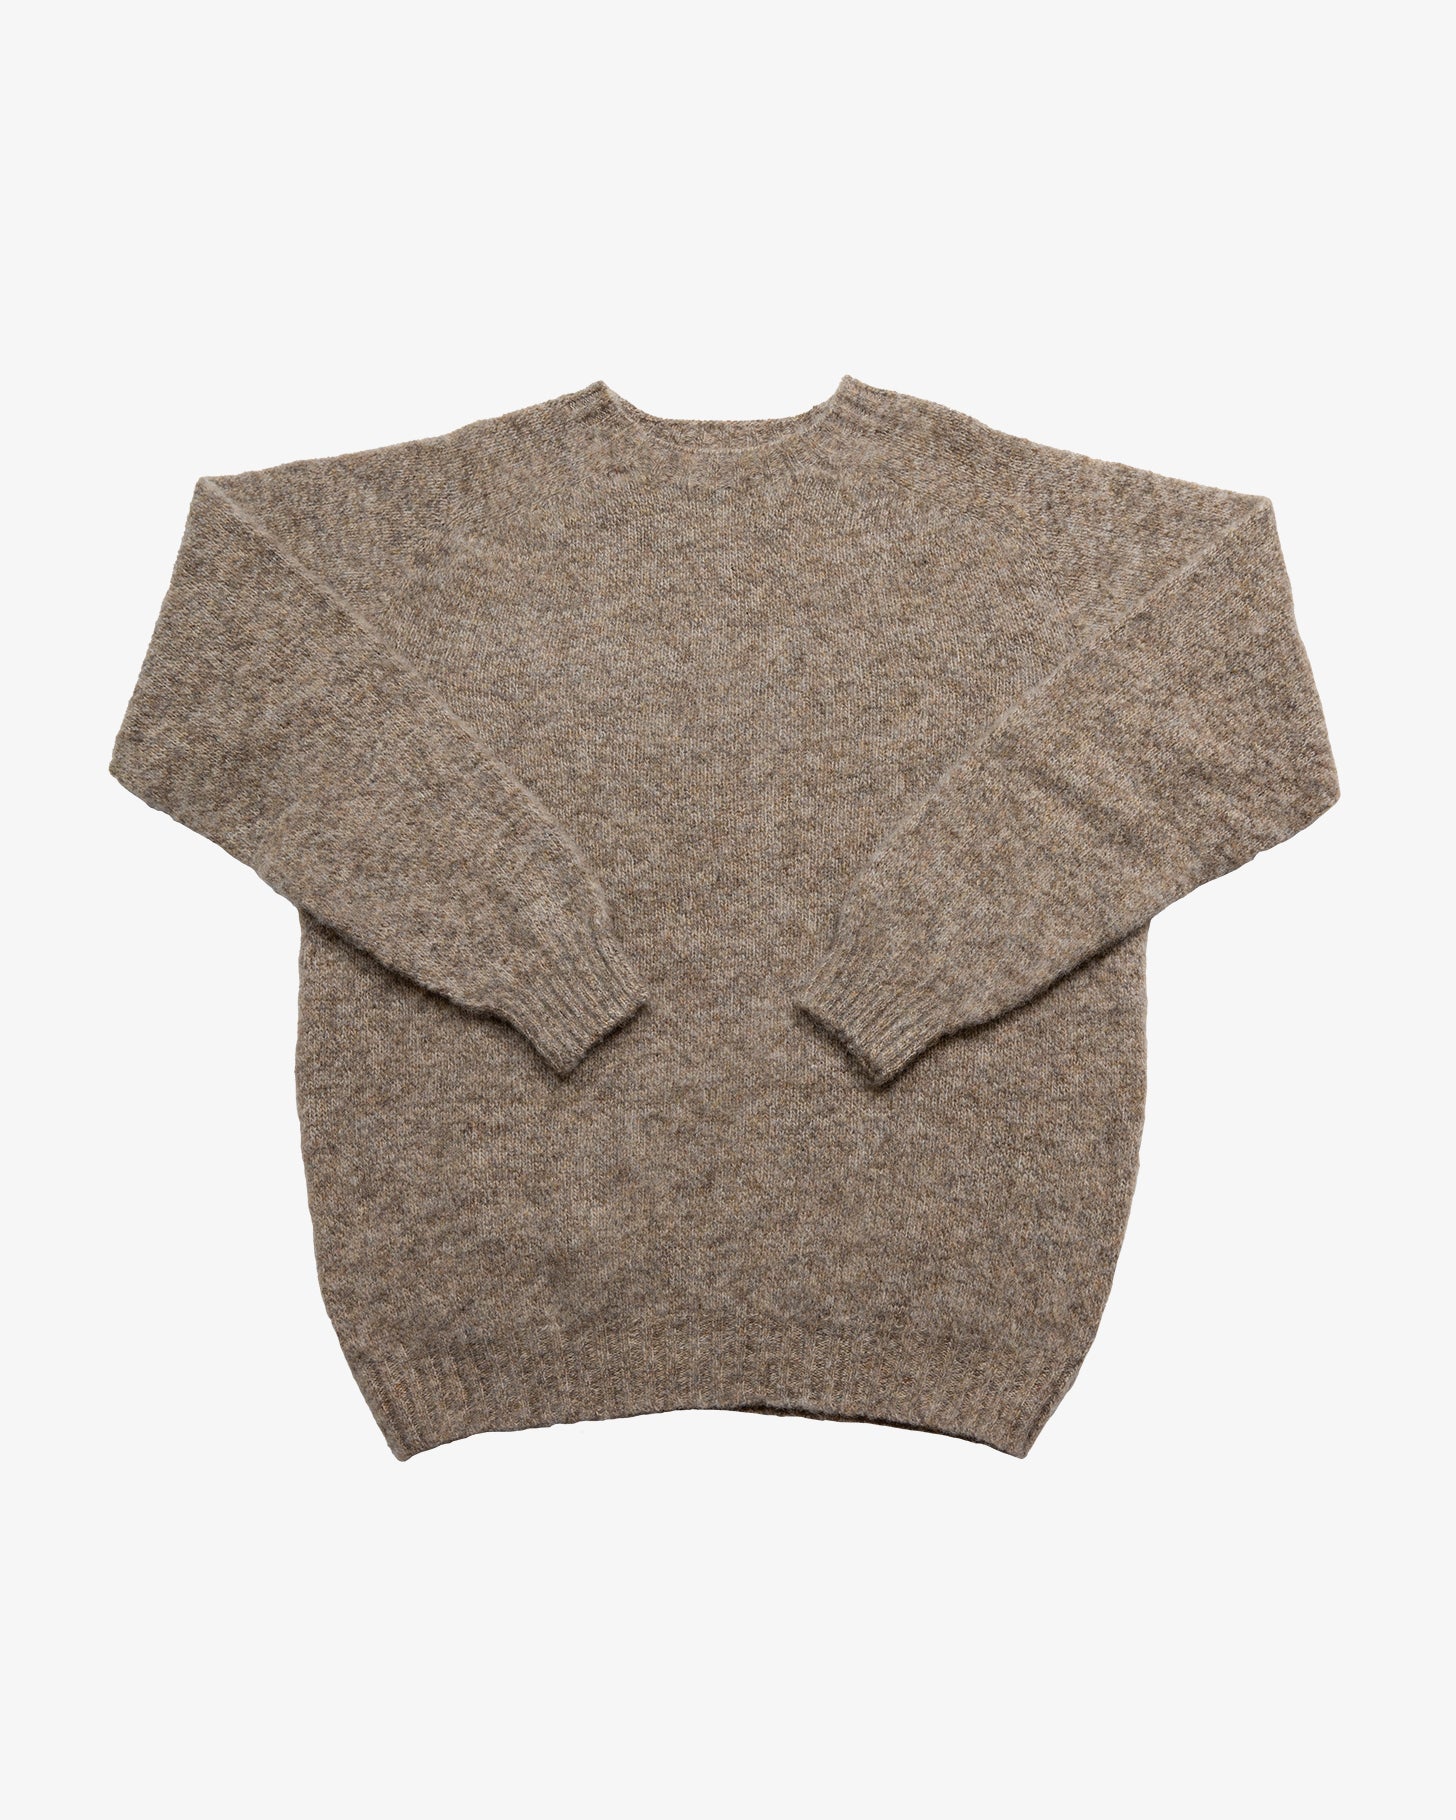 FITZROY SWEATER - DOUBLE BRUSHED SHALE